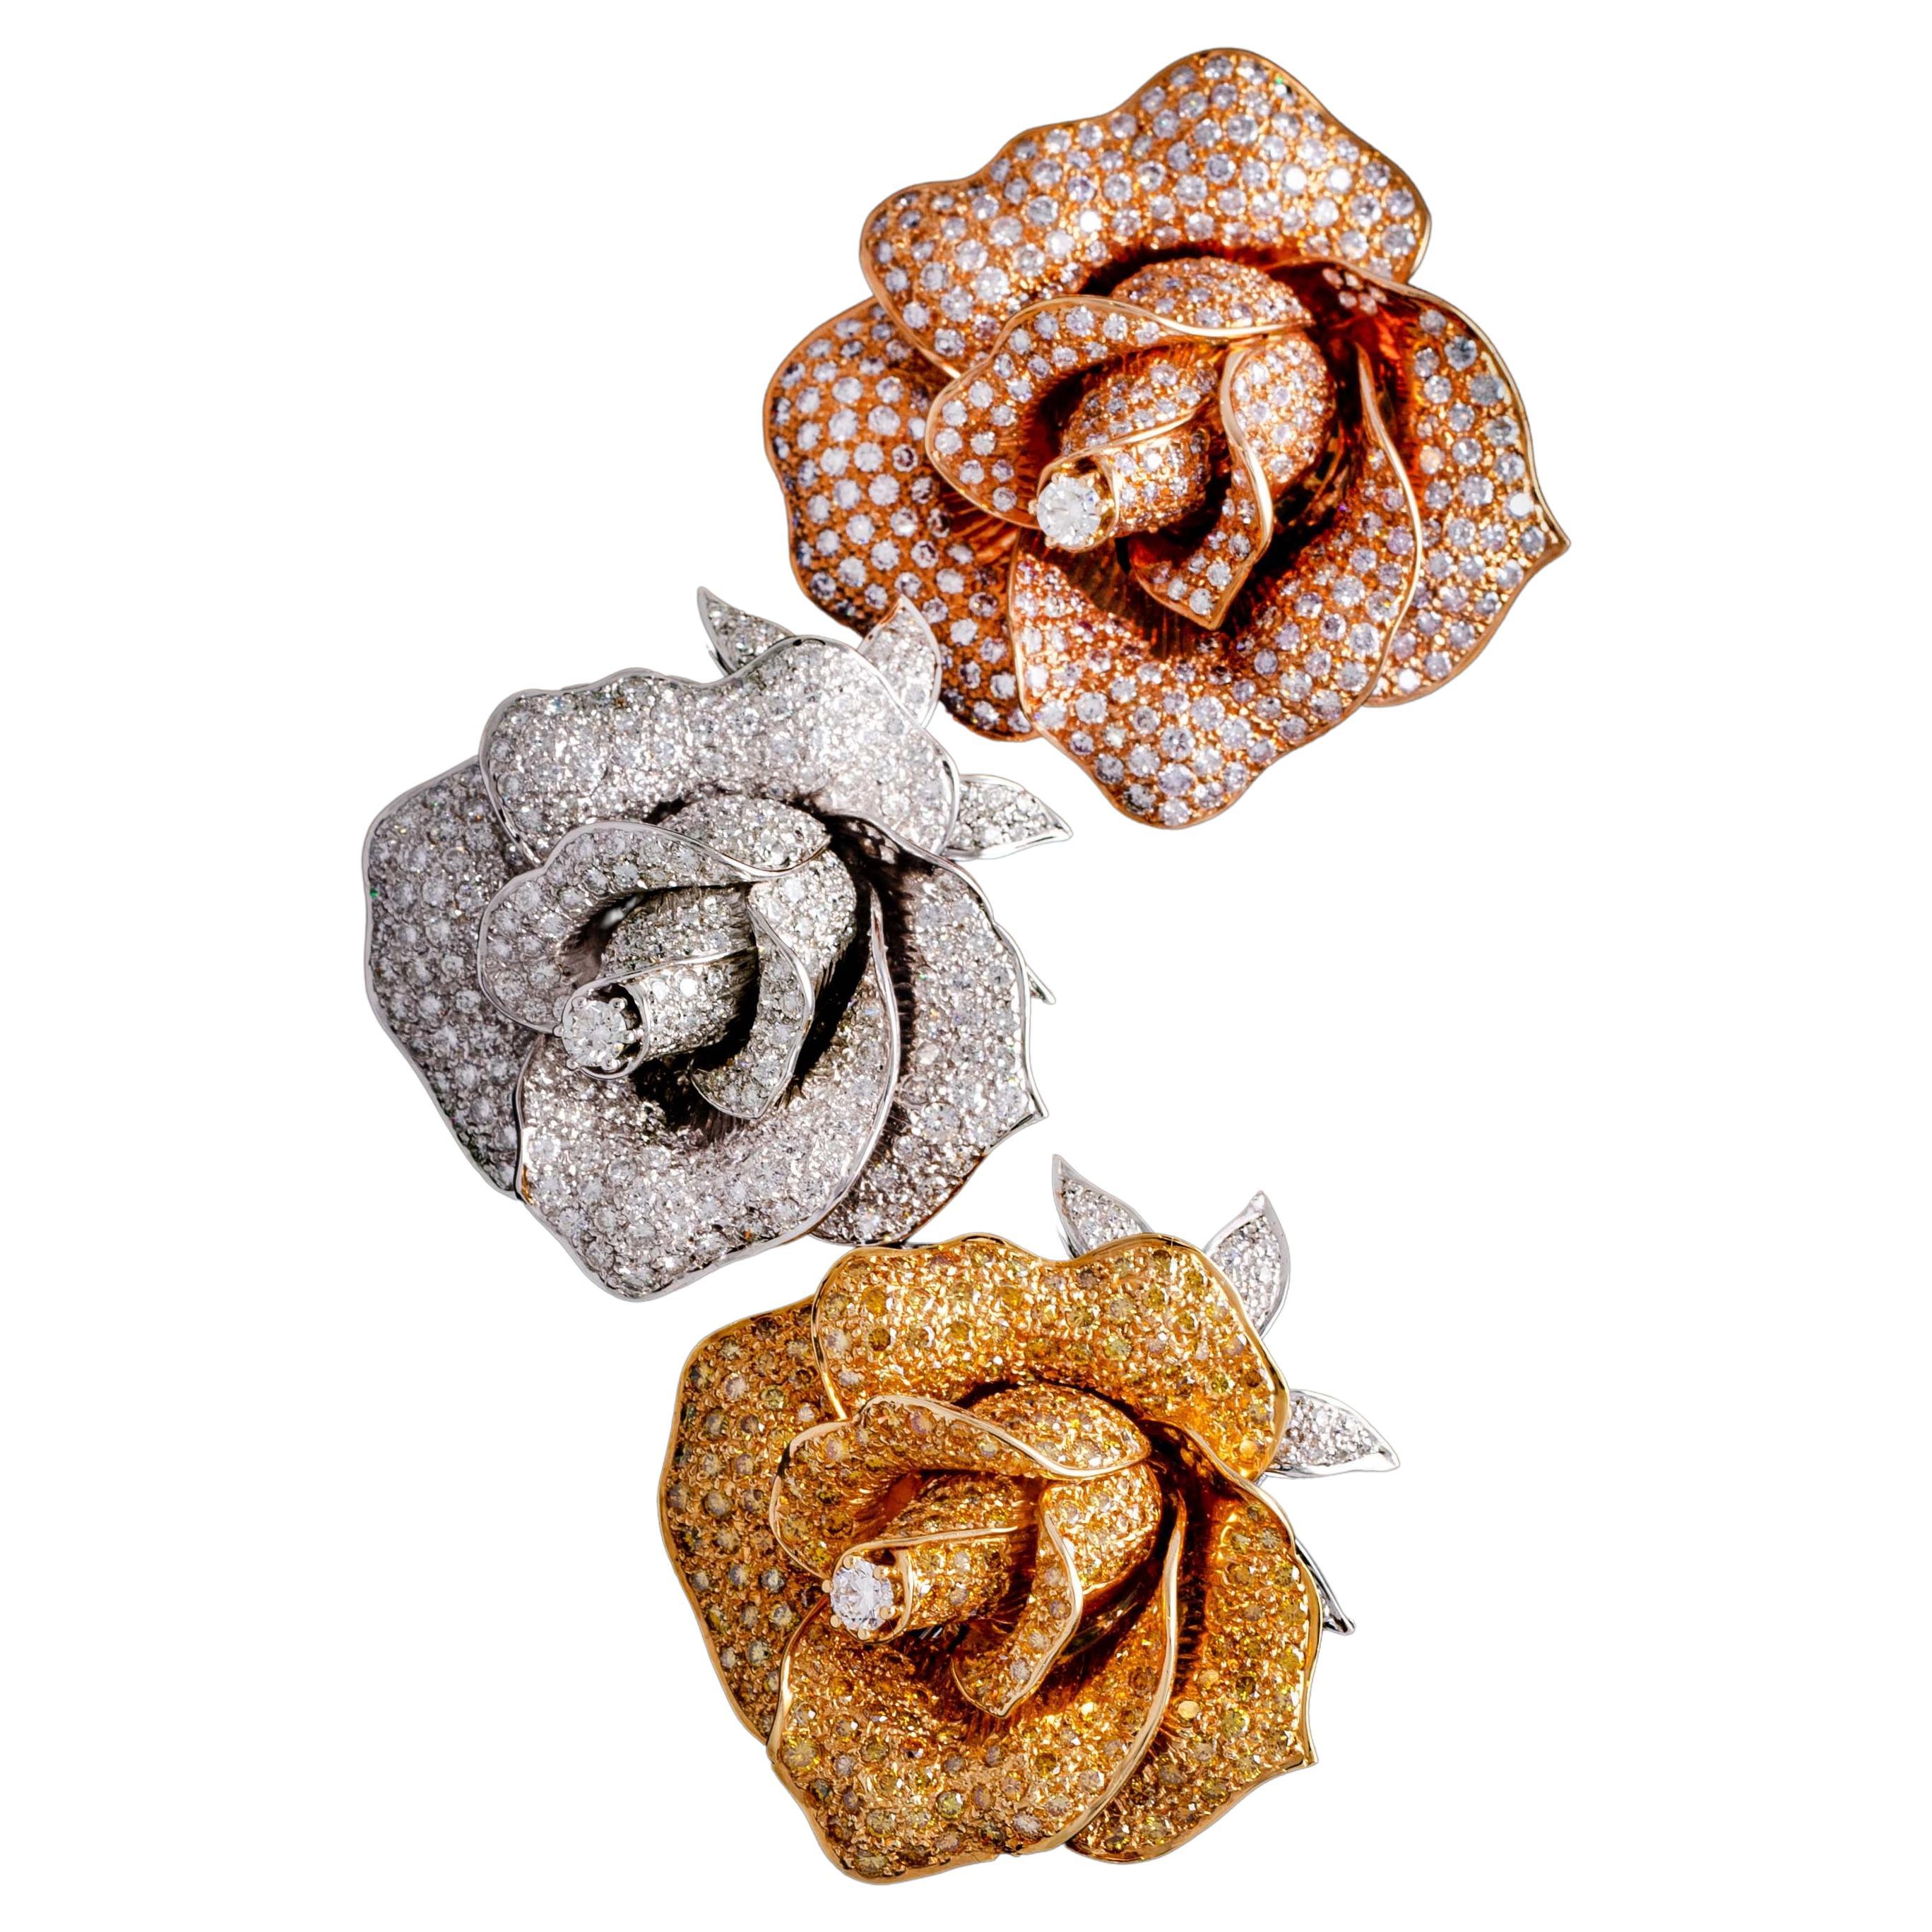 Three Diamond and 18K Gold brooches representing roses.

Dimensions: 
Pink: approximately 5.50 x 5.00 centimeters.
Yellow: approximately 5.20 x 4.70 centimeters.
White: approximately 5.20 x 4.70 centimeters.

Total weight: 118.71 grams.
(Pink: 40.90